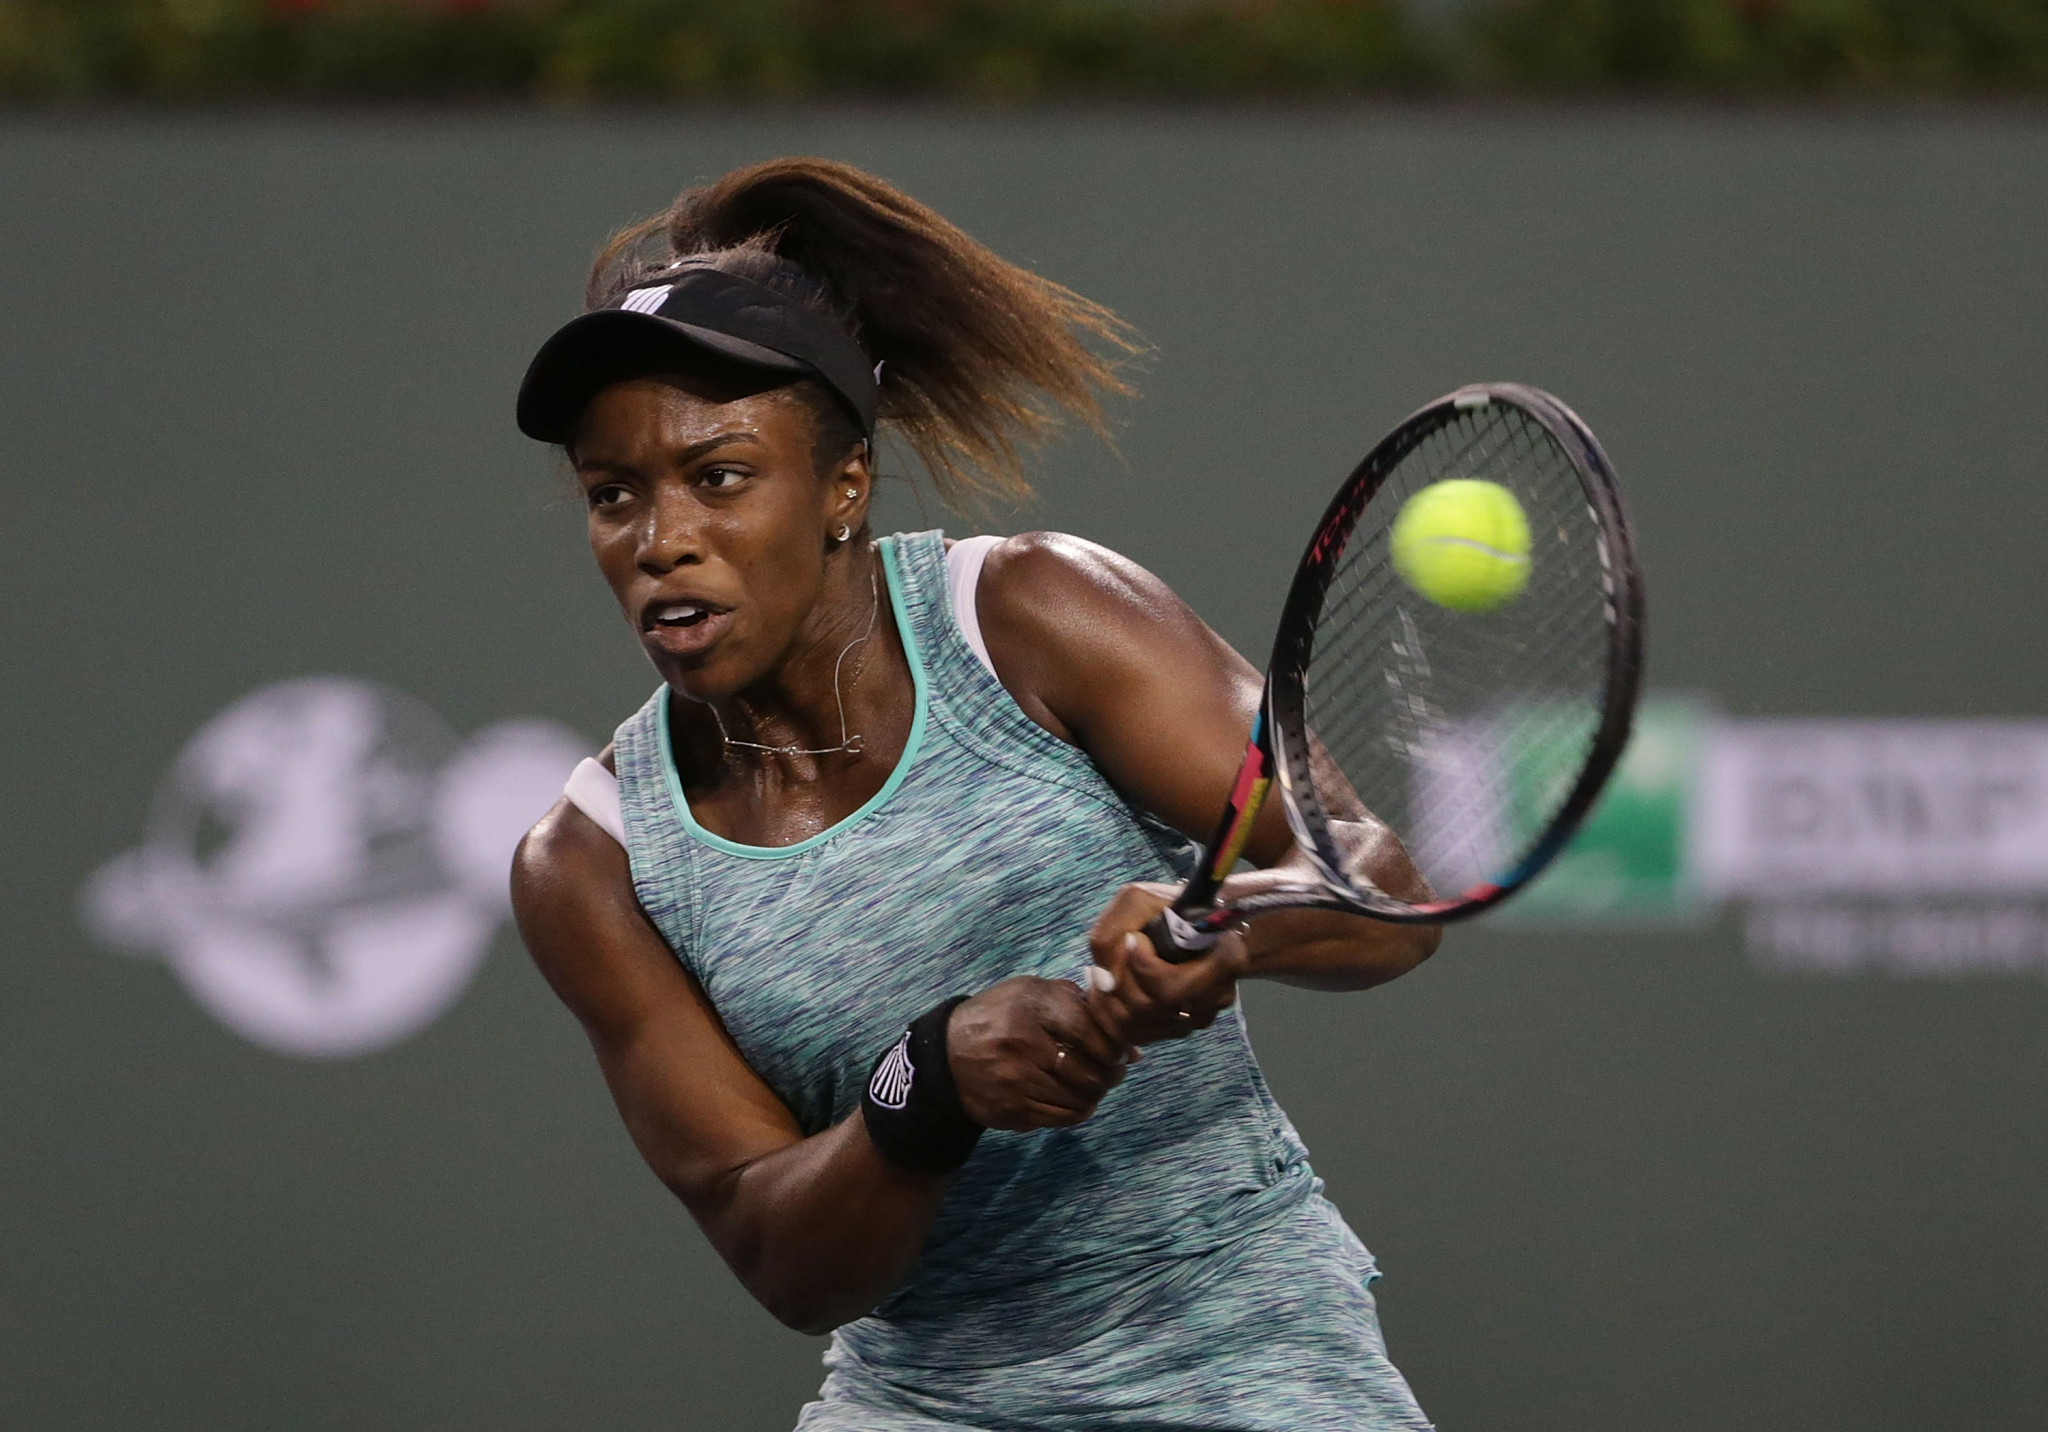 Sachia Vickery saw off the challenge of Eugenie Bouchard in her match at Indian Wells ©Getty Images 